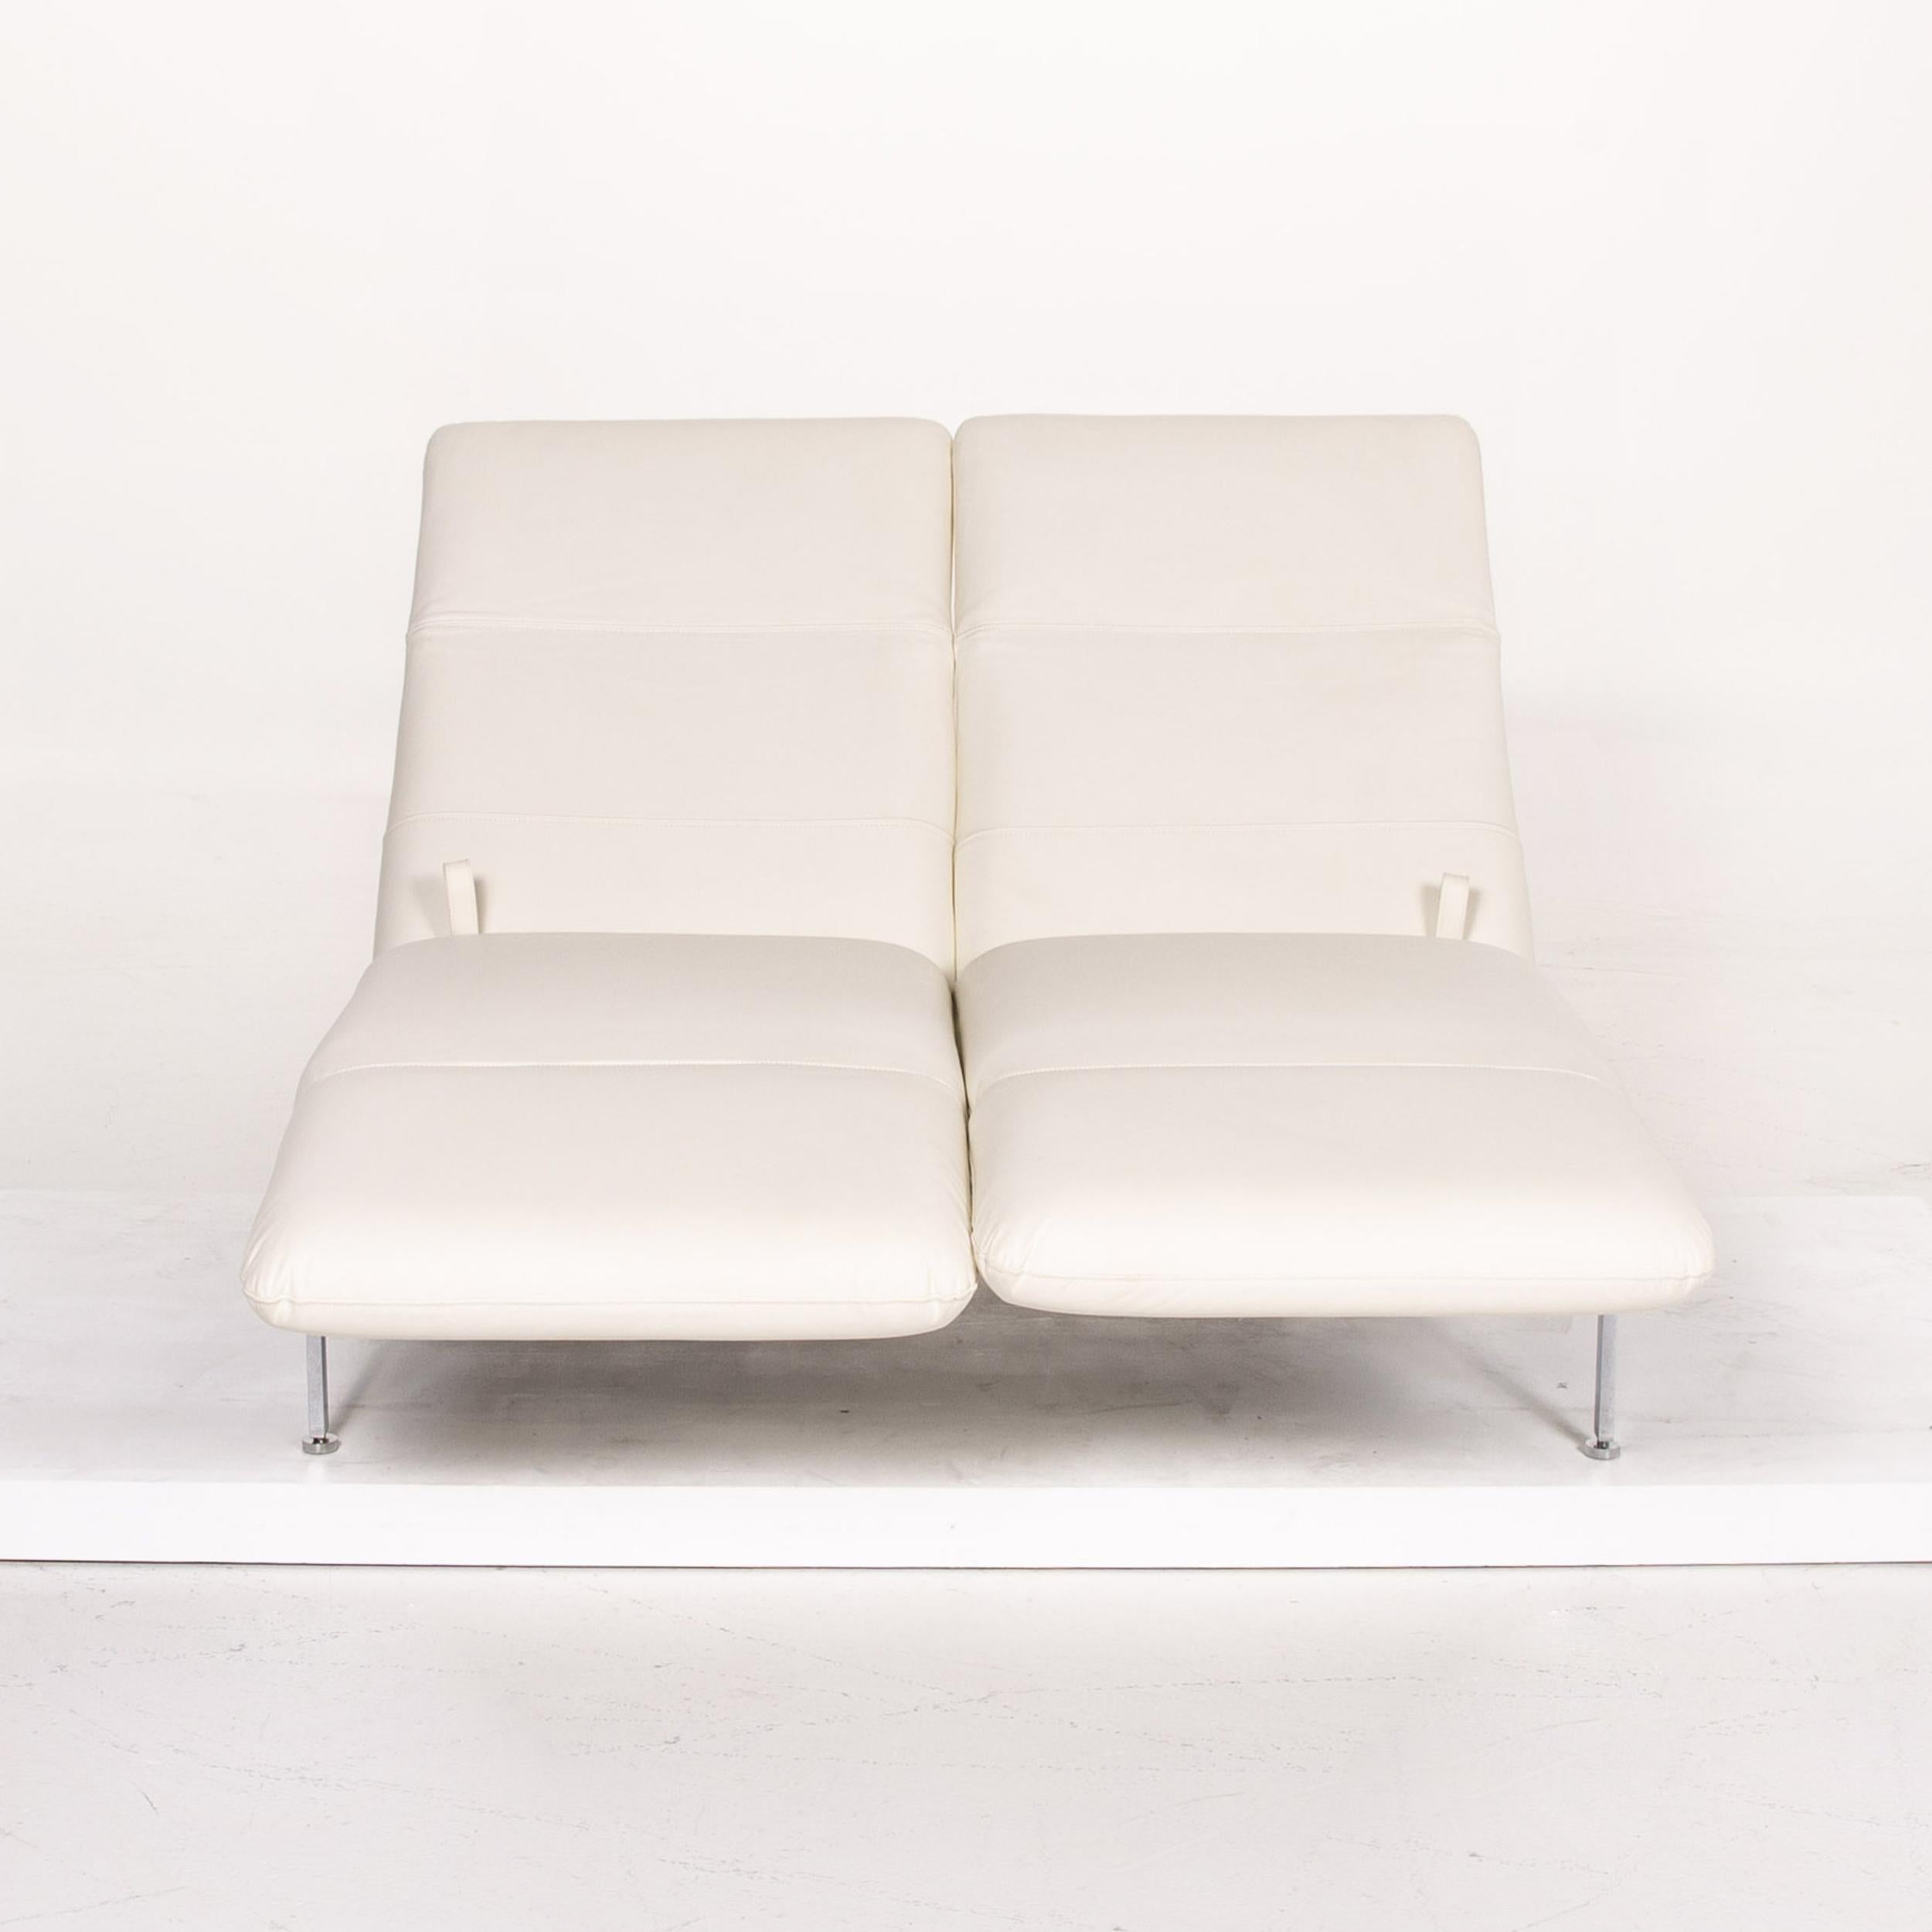 Modern Brühl & Sippold Roro Leather Sofa White Two-Seat Function Sleeping Function For Sale